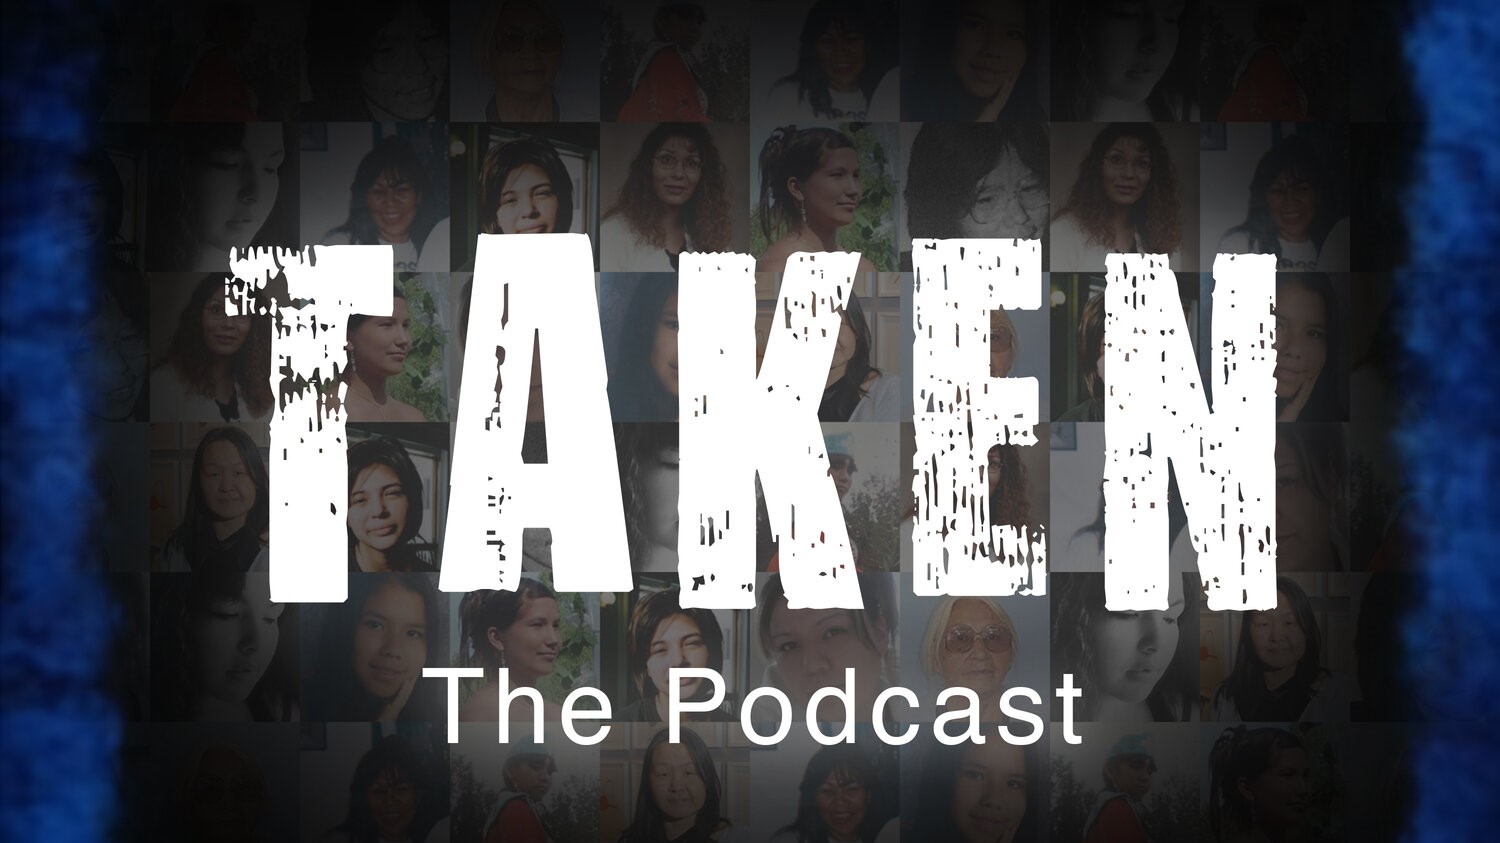 The words "TAKEN The Podcast" can be seen in front of pictures of indigenous women.